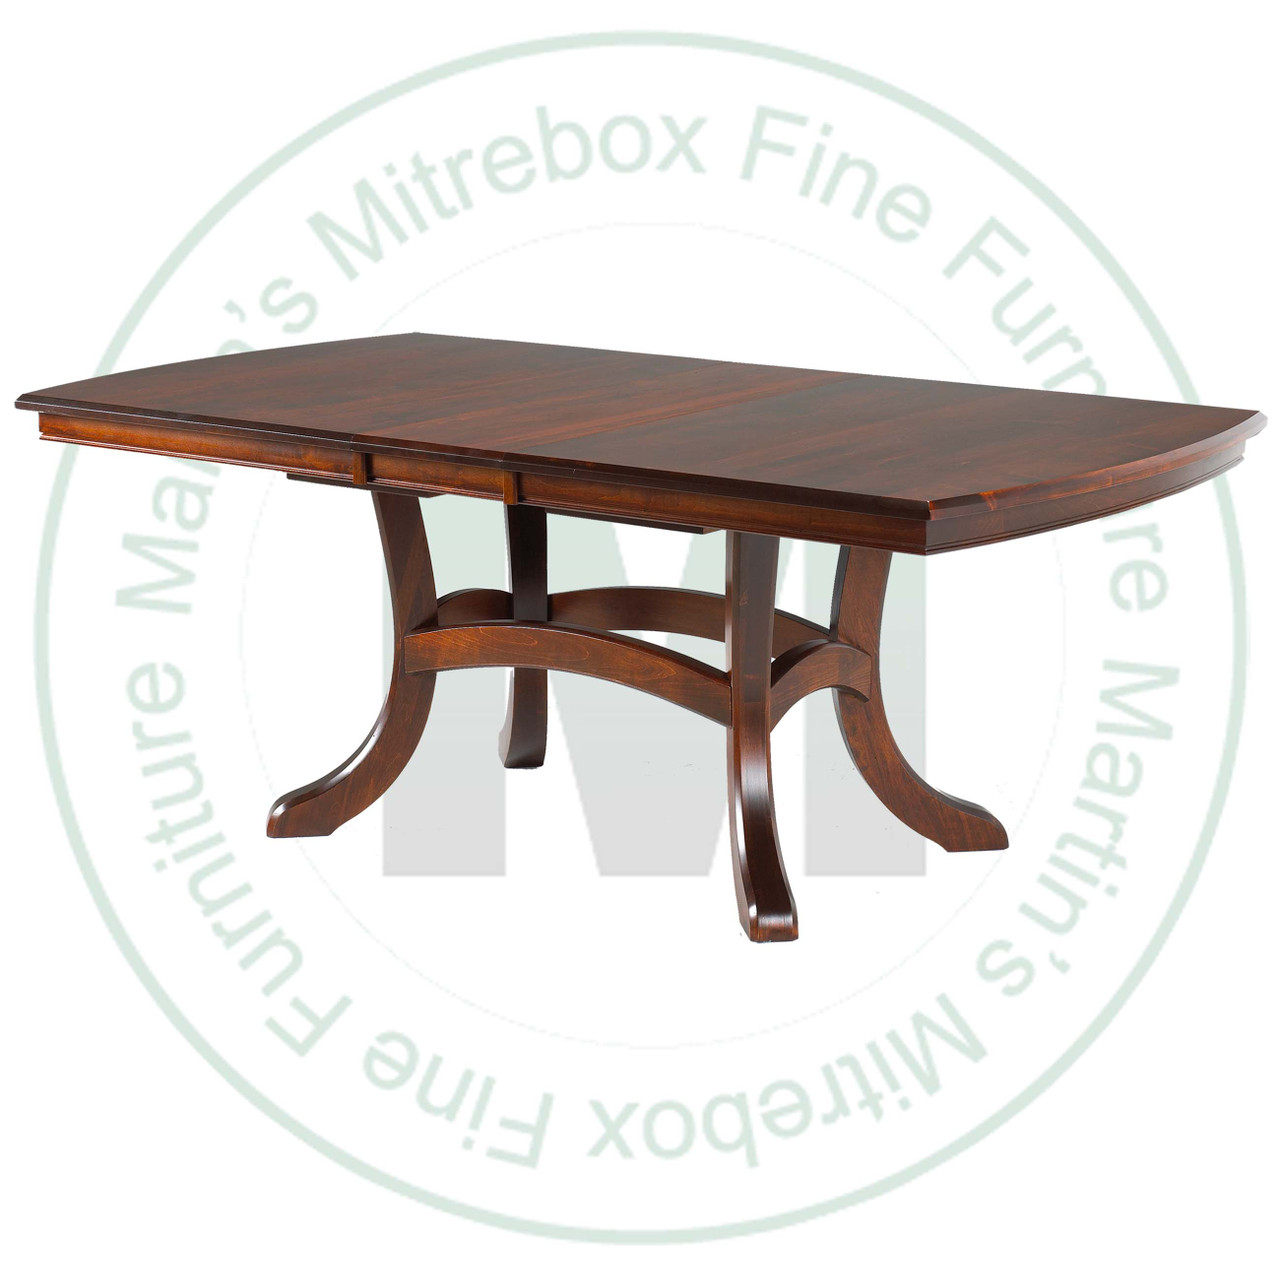 Maple Jordan Double Pedestal Solid Top Table 42''D x 96''W x 30''H. Table Has 1.25'' Thick Top